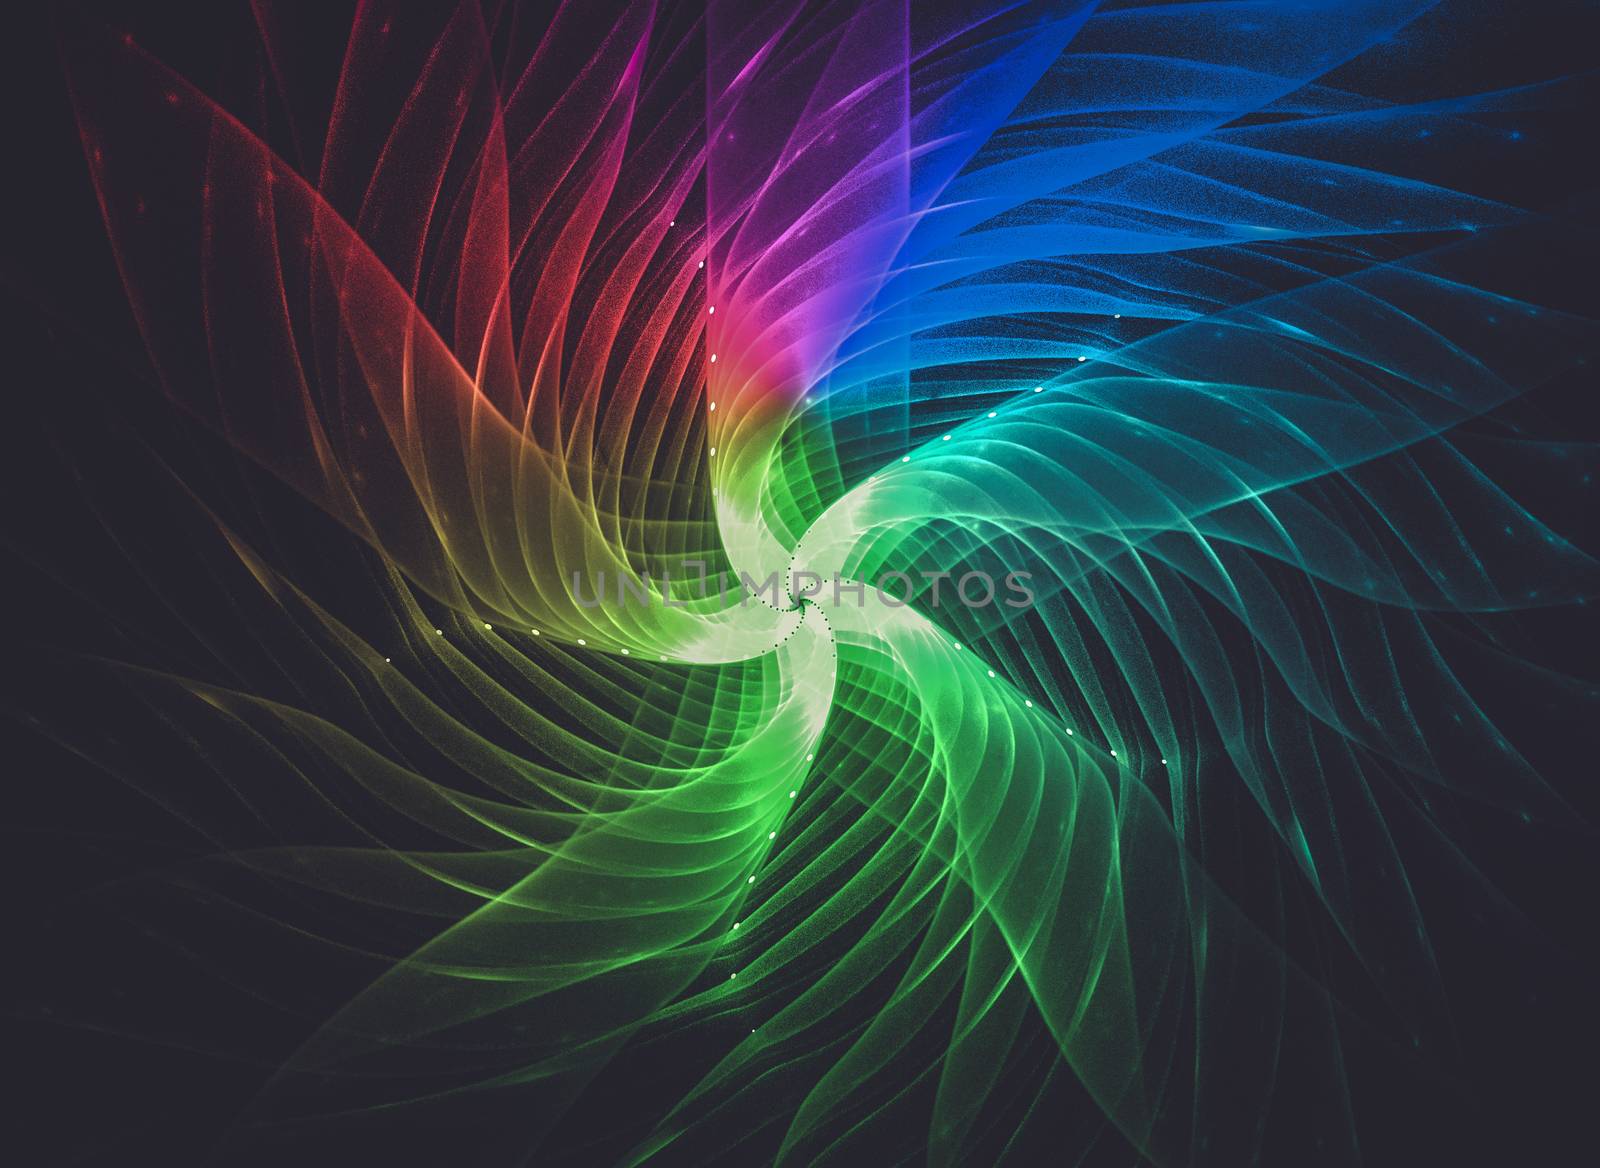 Star. Creative design background, fractal styles with color design of dreamy forms imagination and fantasy